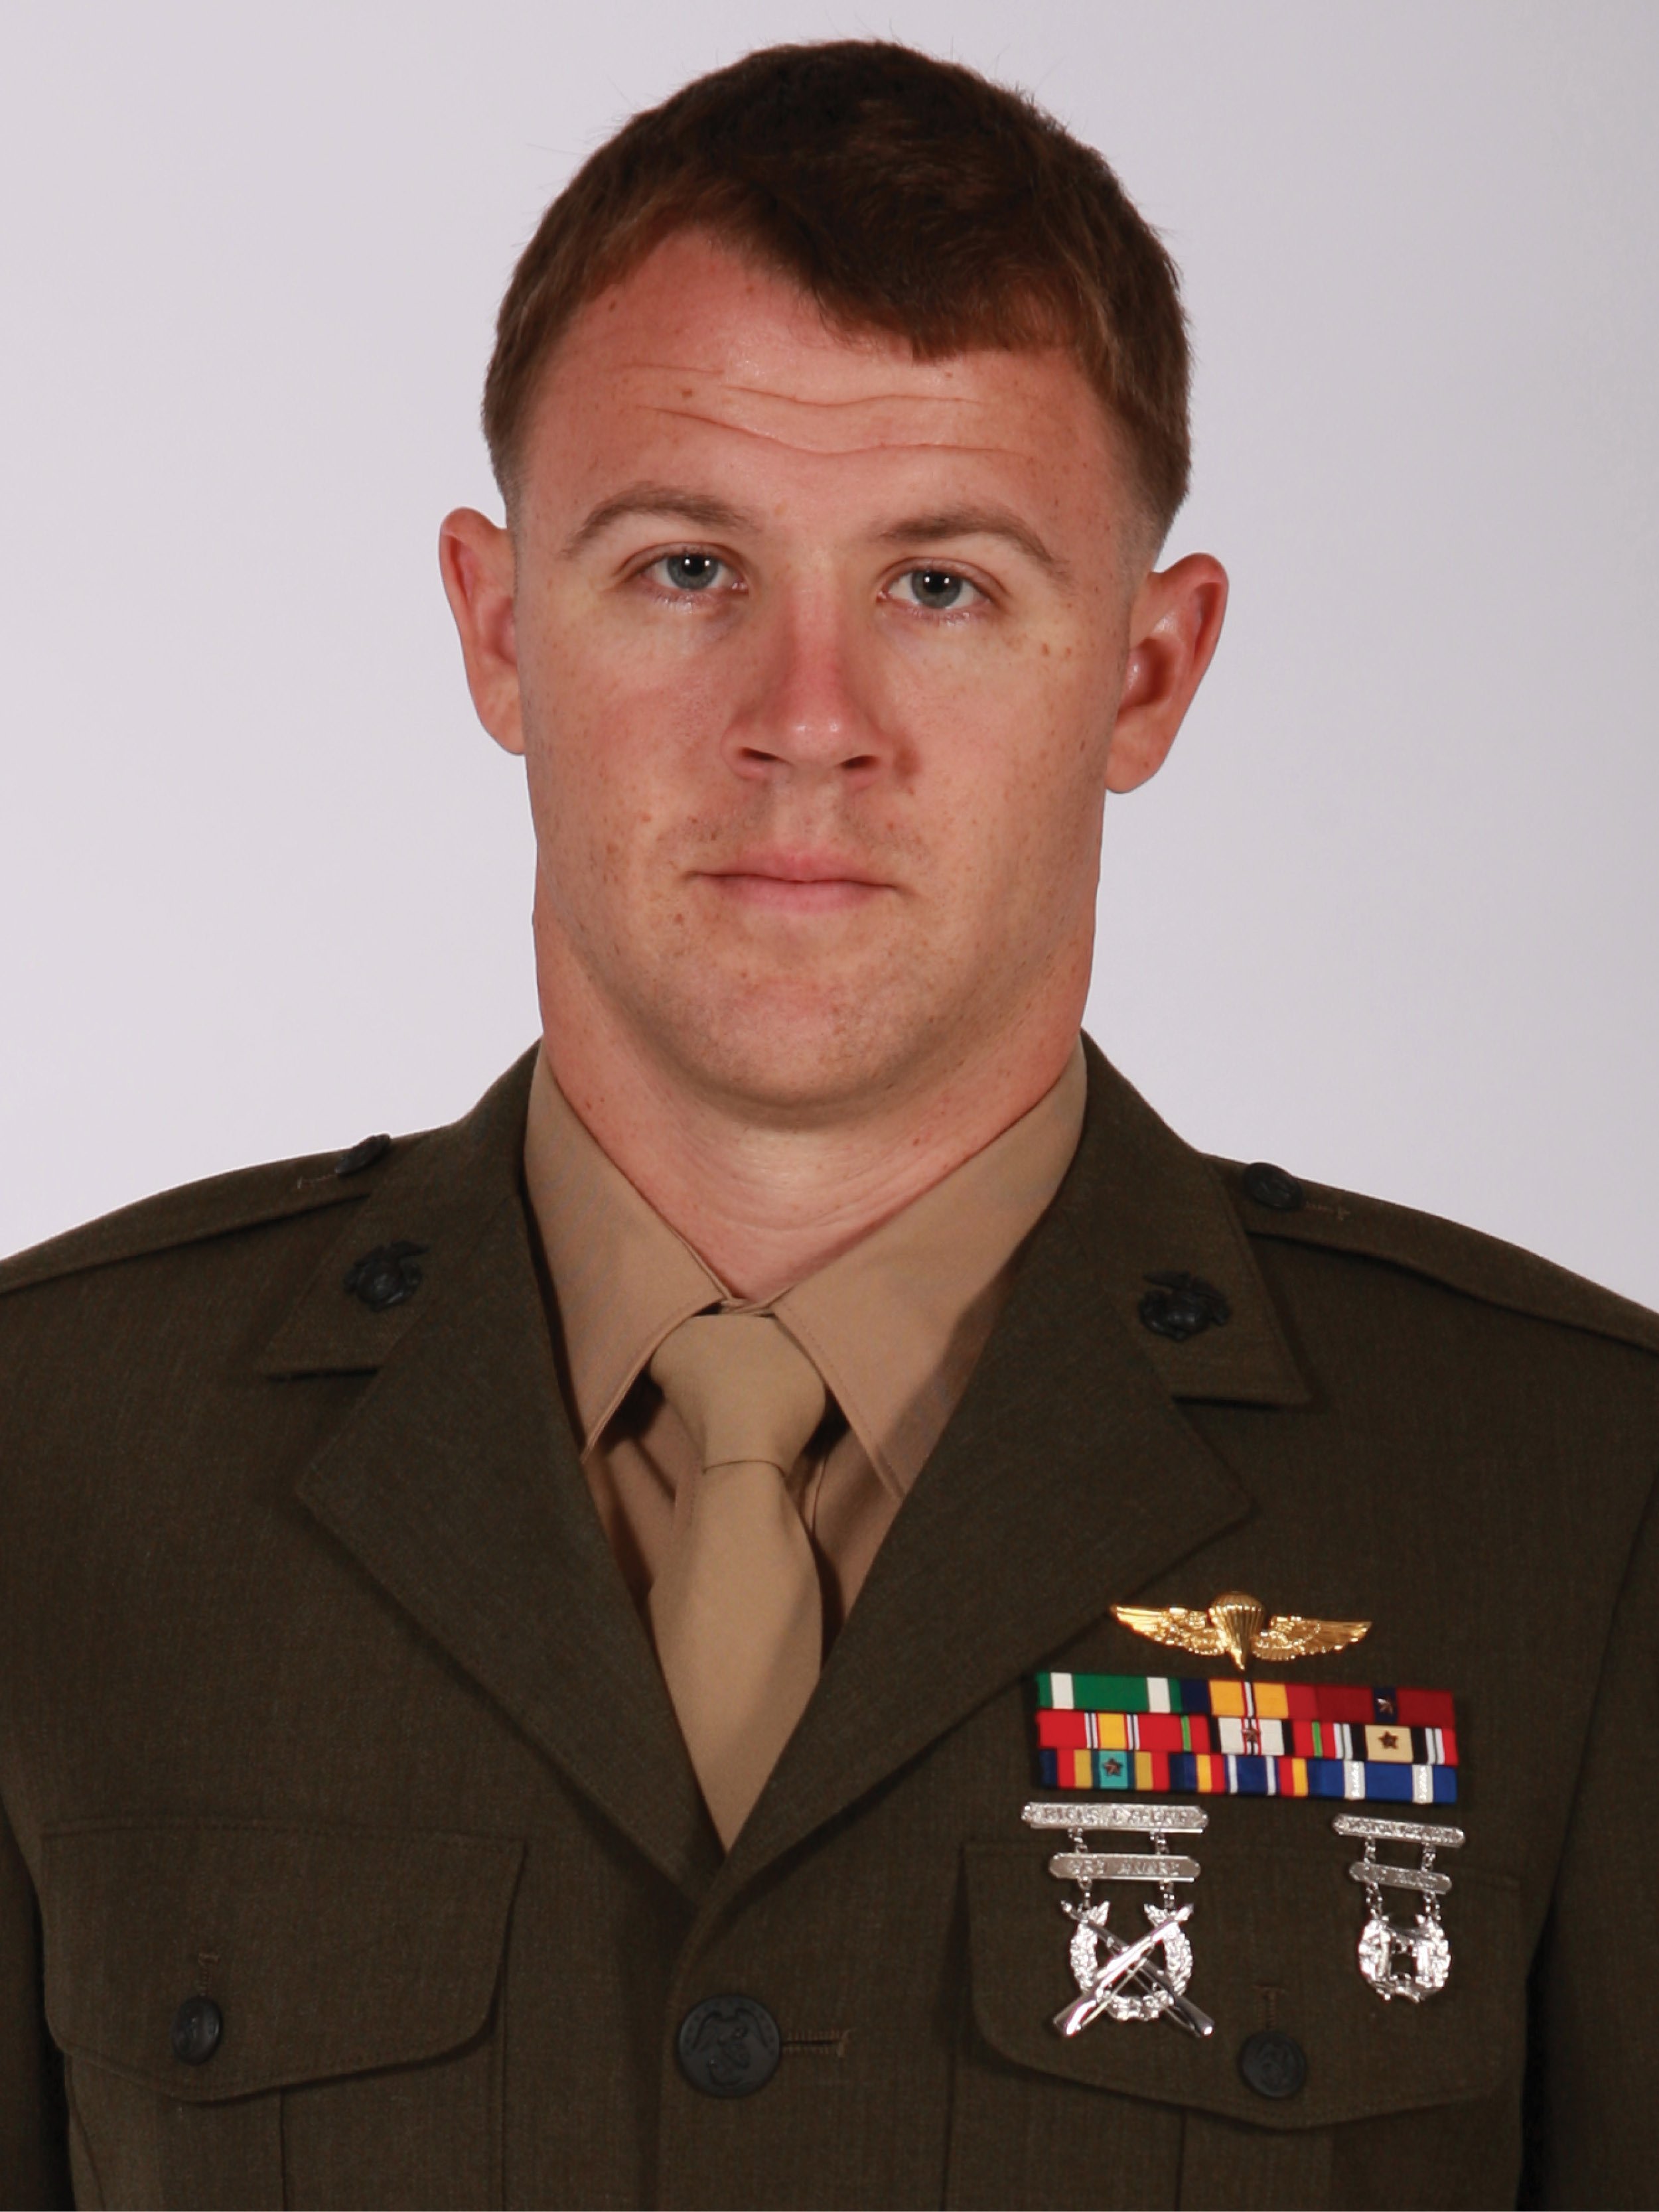 Staff Sgt. Andrew Seif died when a U.S. Army UH-60 Blackhawk Helicopter crashed near Eglin, Florida, at approximately 8:30 p.m. March 10, 2015. Seif, 26, a native of Holland, Michigan, served within U.S. Marine Corps Forces, Special Operational Command as an element member. His personal awards include Silver Star Medal, Combat Action ribbon, Navy And Marine Corps Gold Parachutist Jump Wings, and the Good Conduct medal in lieu of second award.